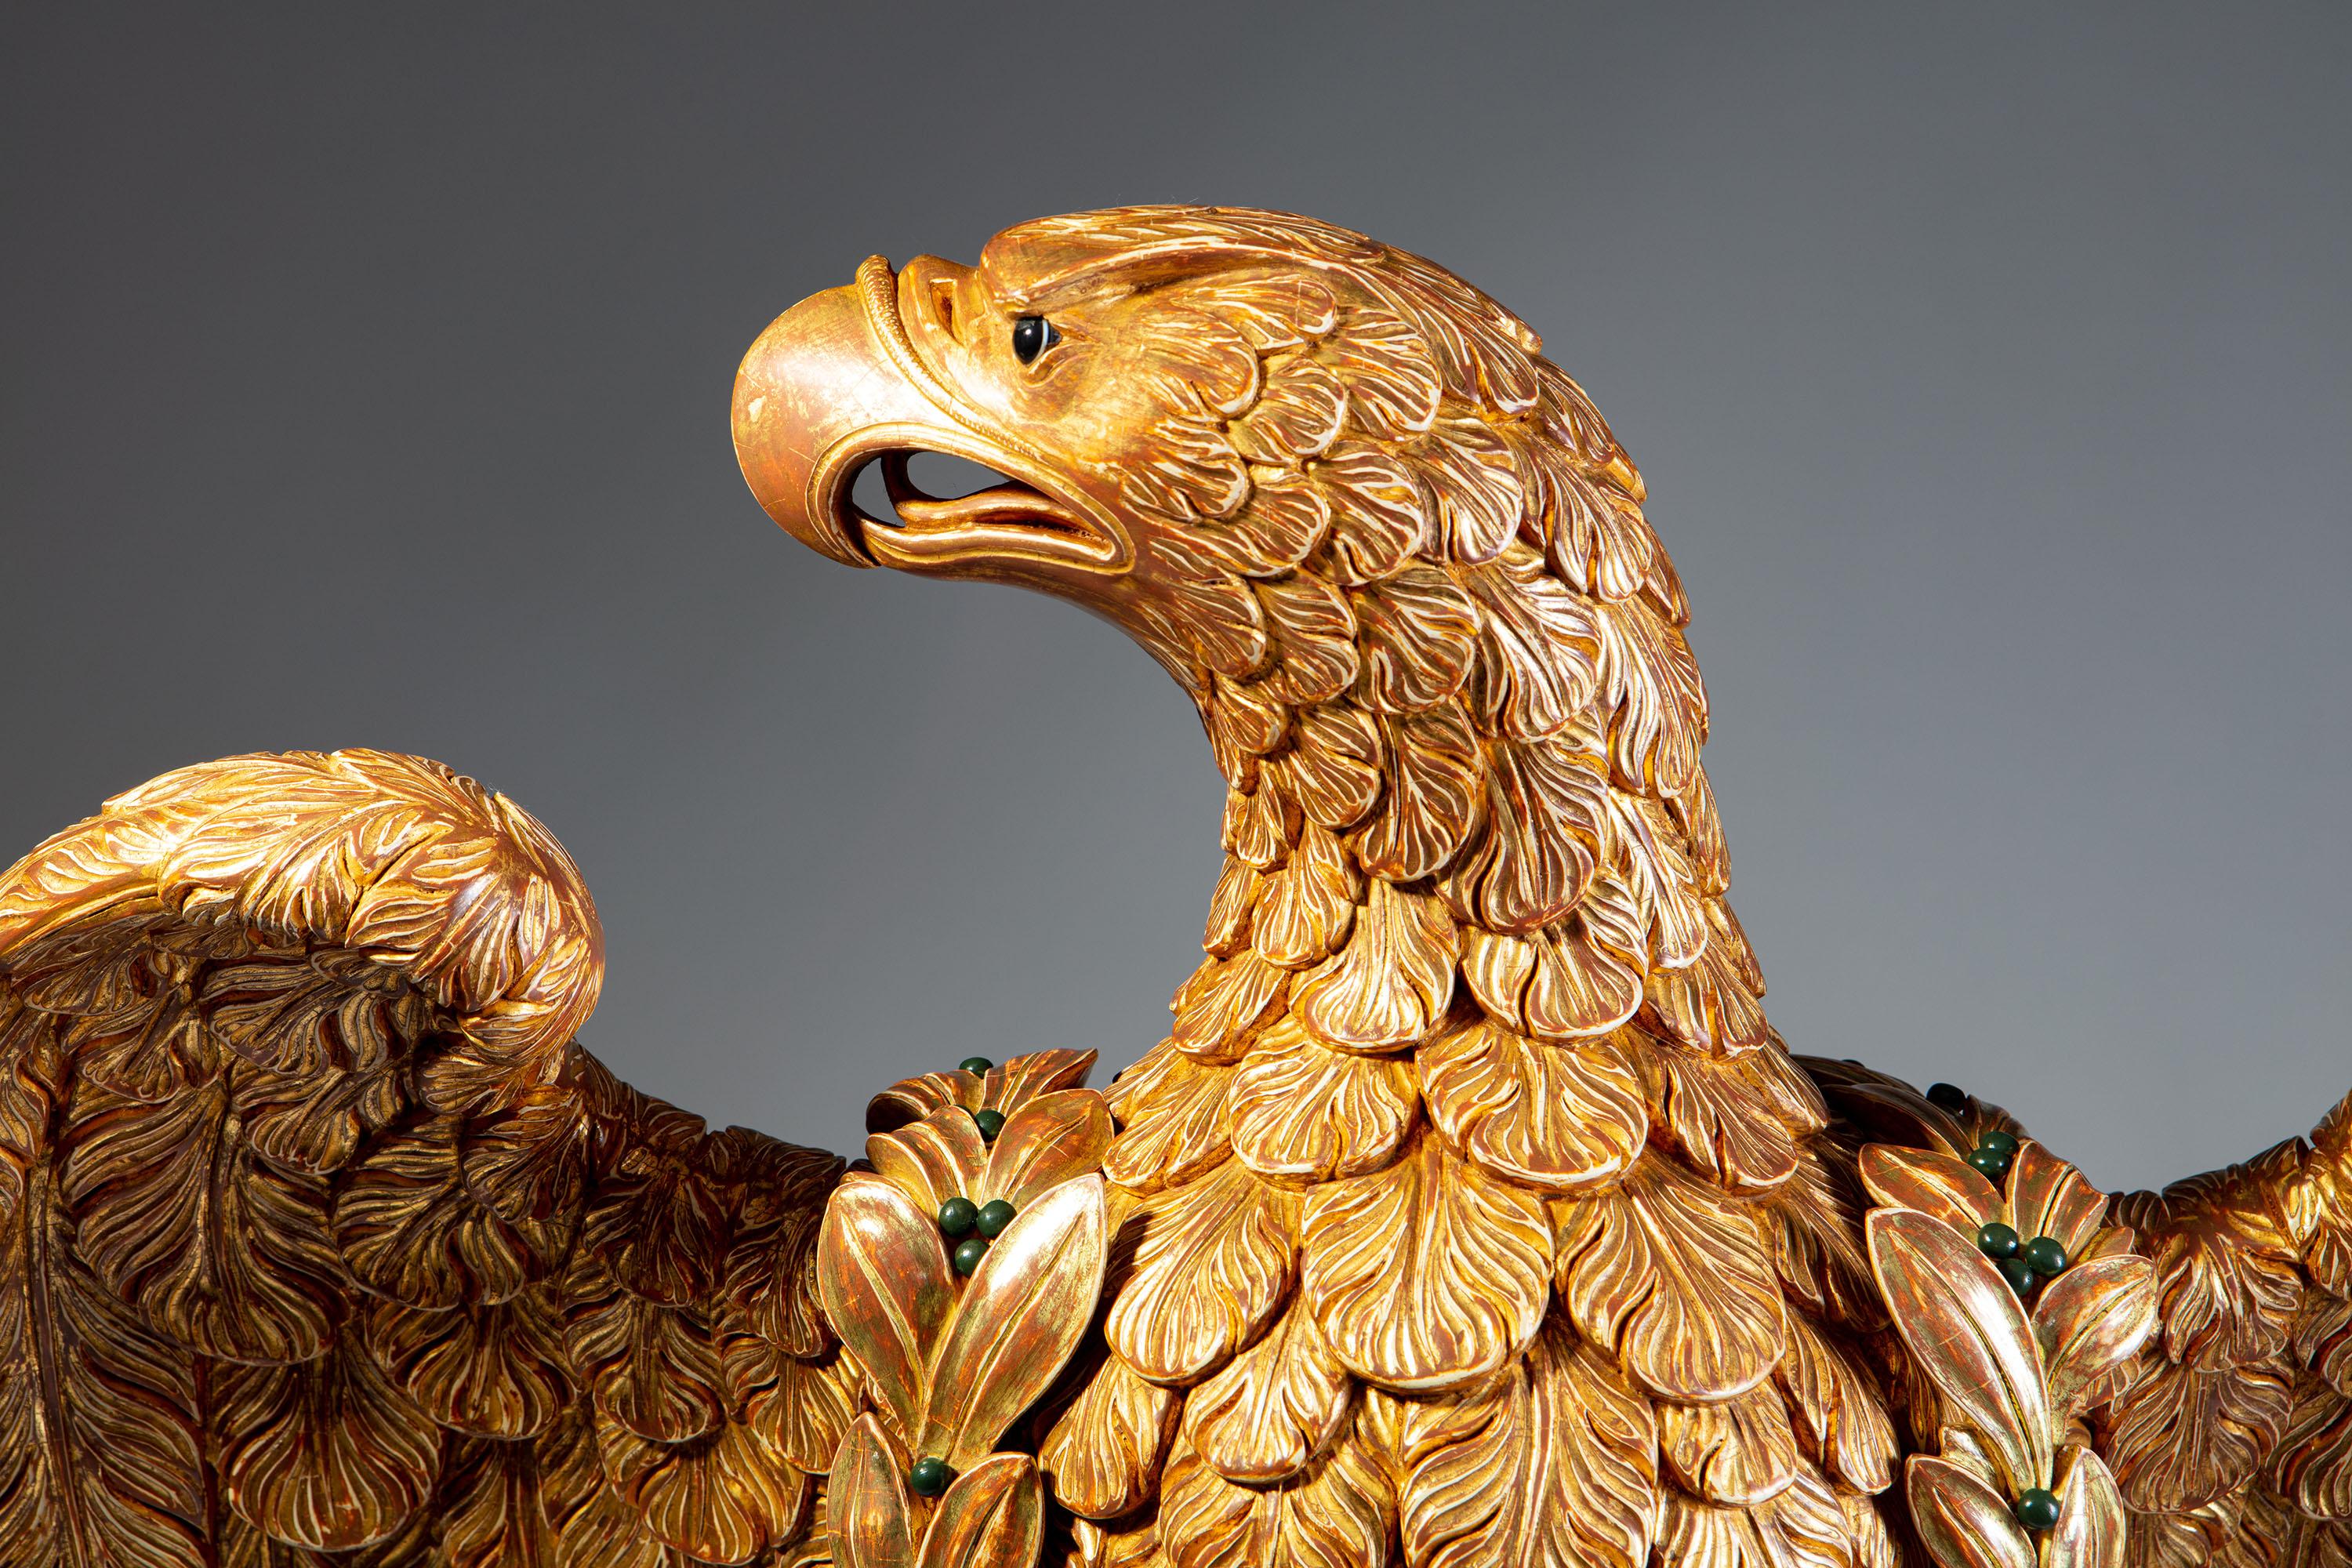 A superb and richly carved giltwood eagle perched on rocks with open wings, the eagle's head looking to its left and fitted with a separate giltwood wreath, studded with malachite and agate cabochons. The eagle raised on a tall 19th century Verde